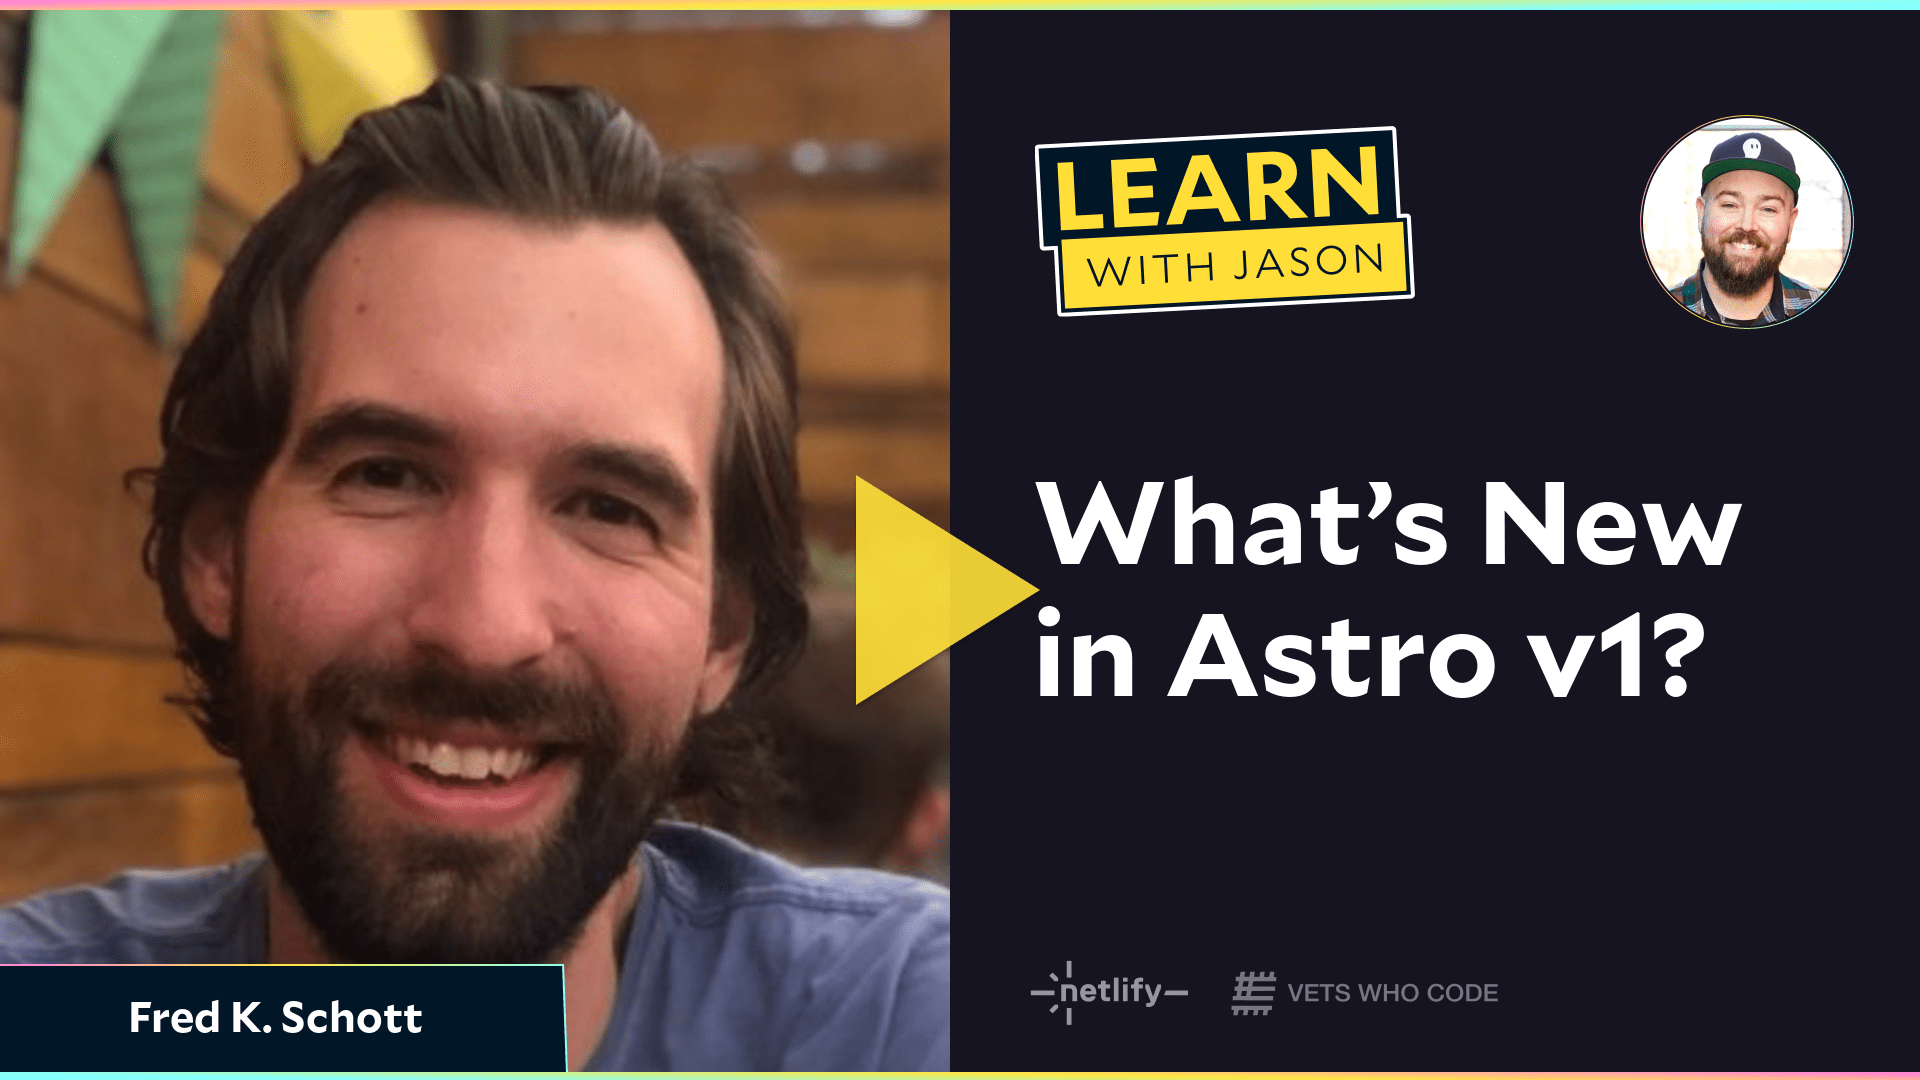 What’s New in Astro v1? (with Fred K. Schott)